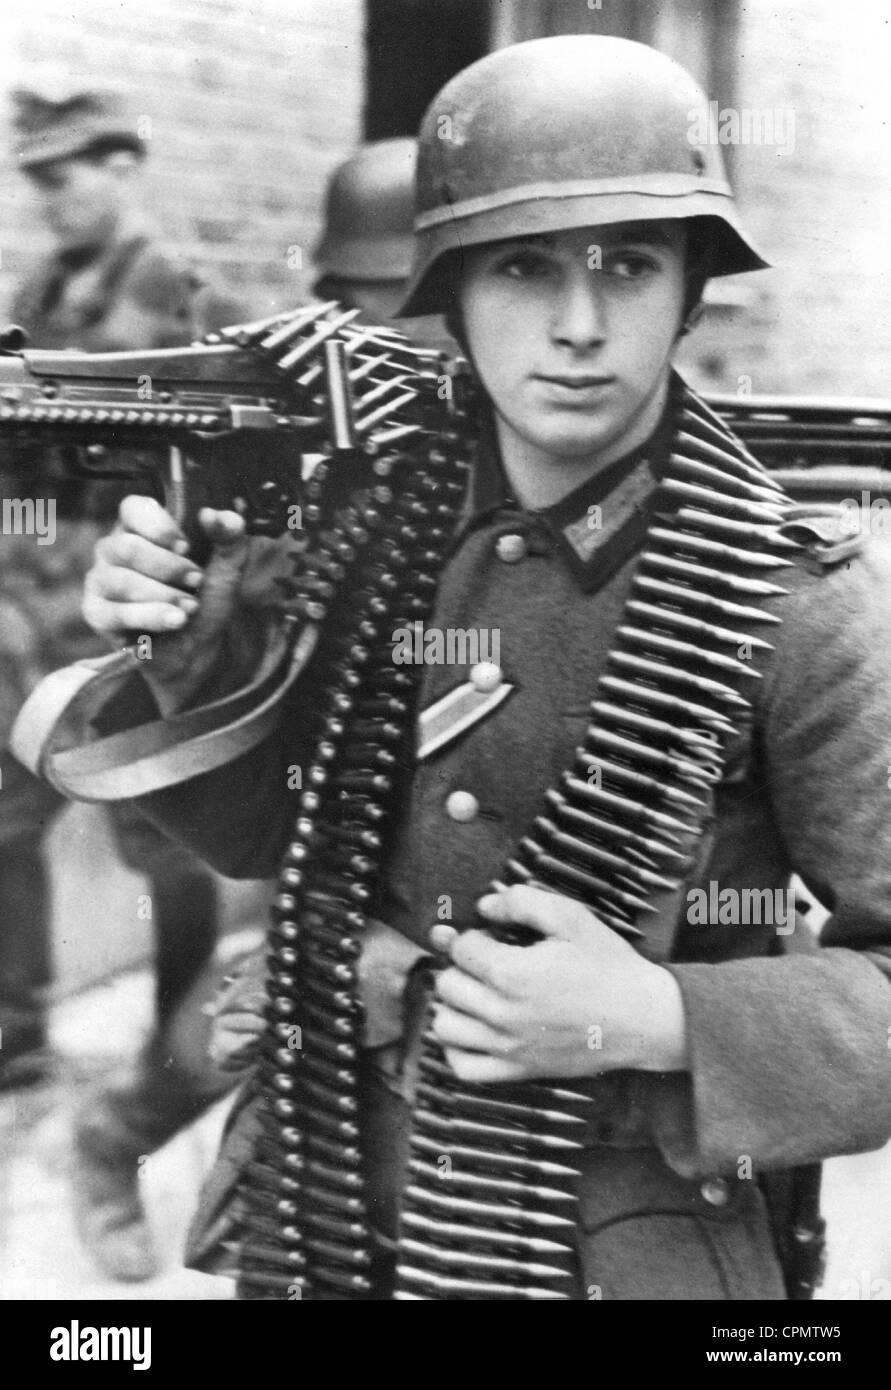 German mahcine gunner on the Western front, 1944 Stock Photo